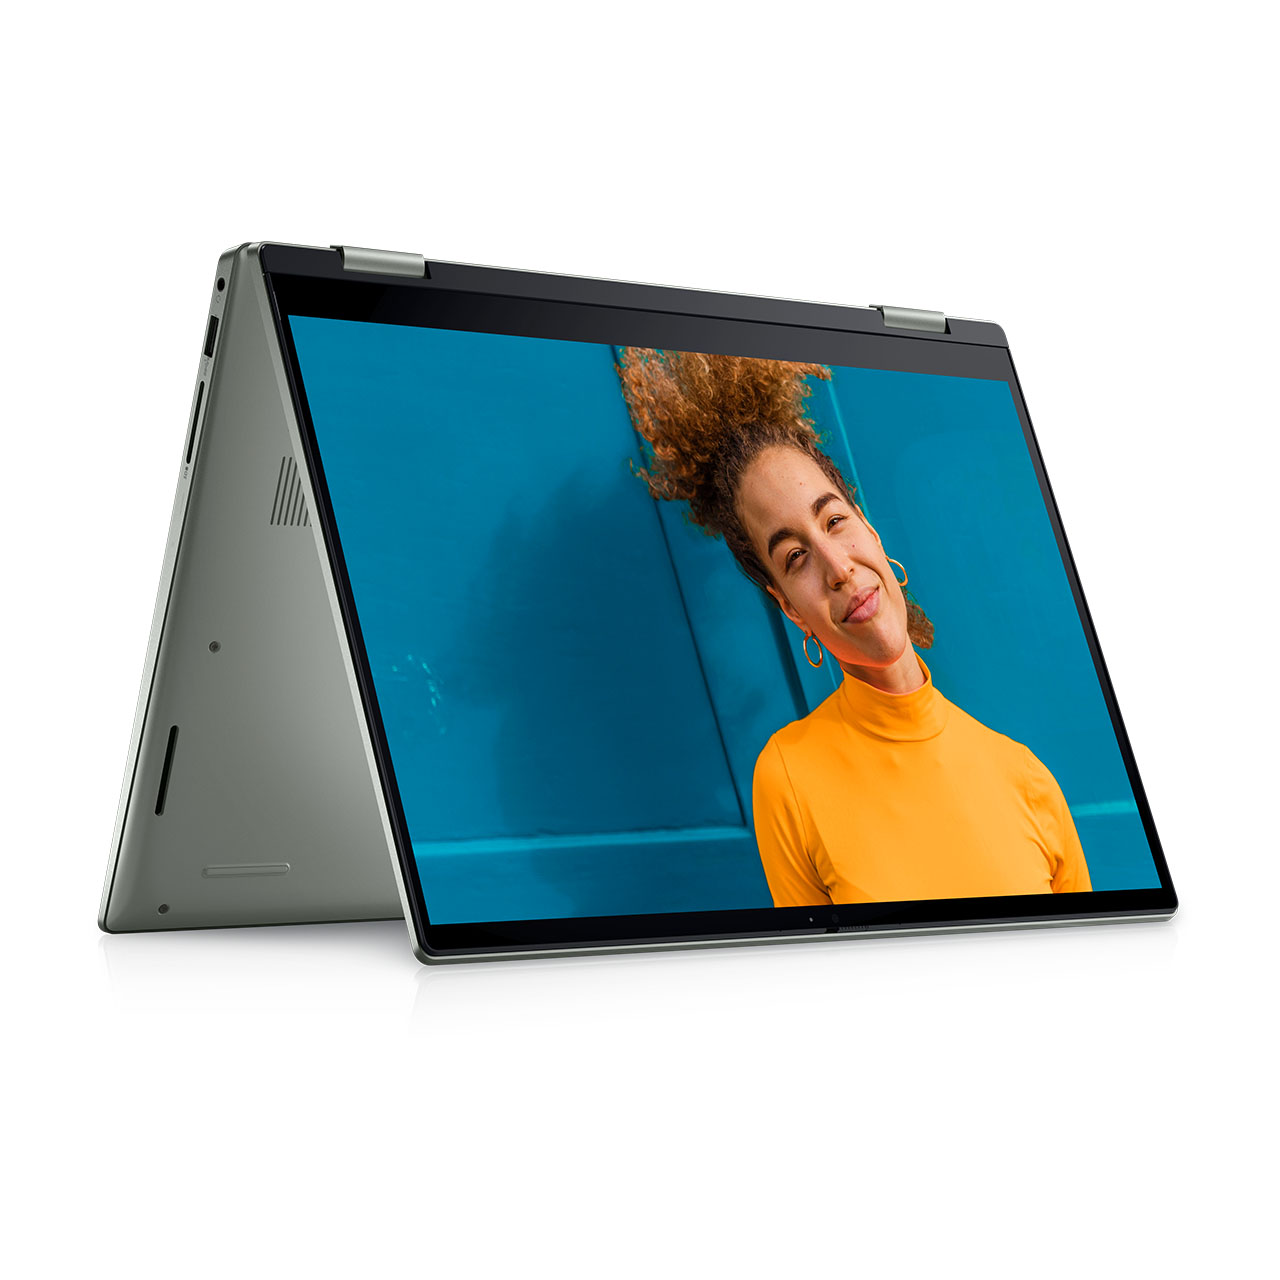 Inspiron 7000 Series Laptops & 2-in-1s